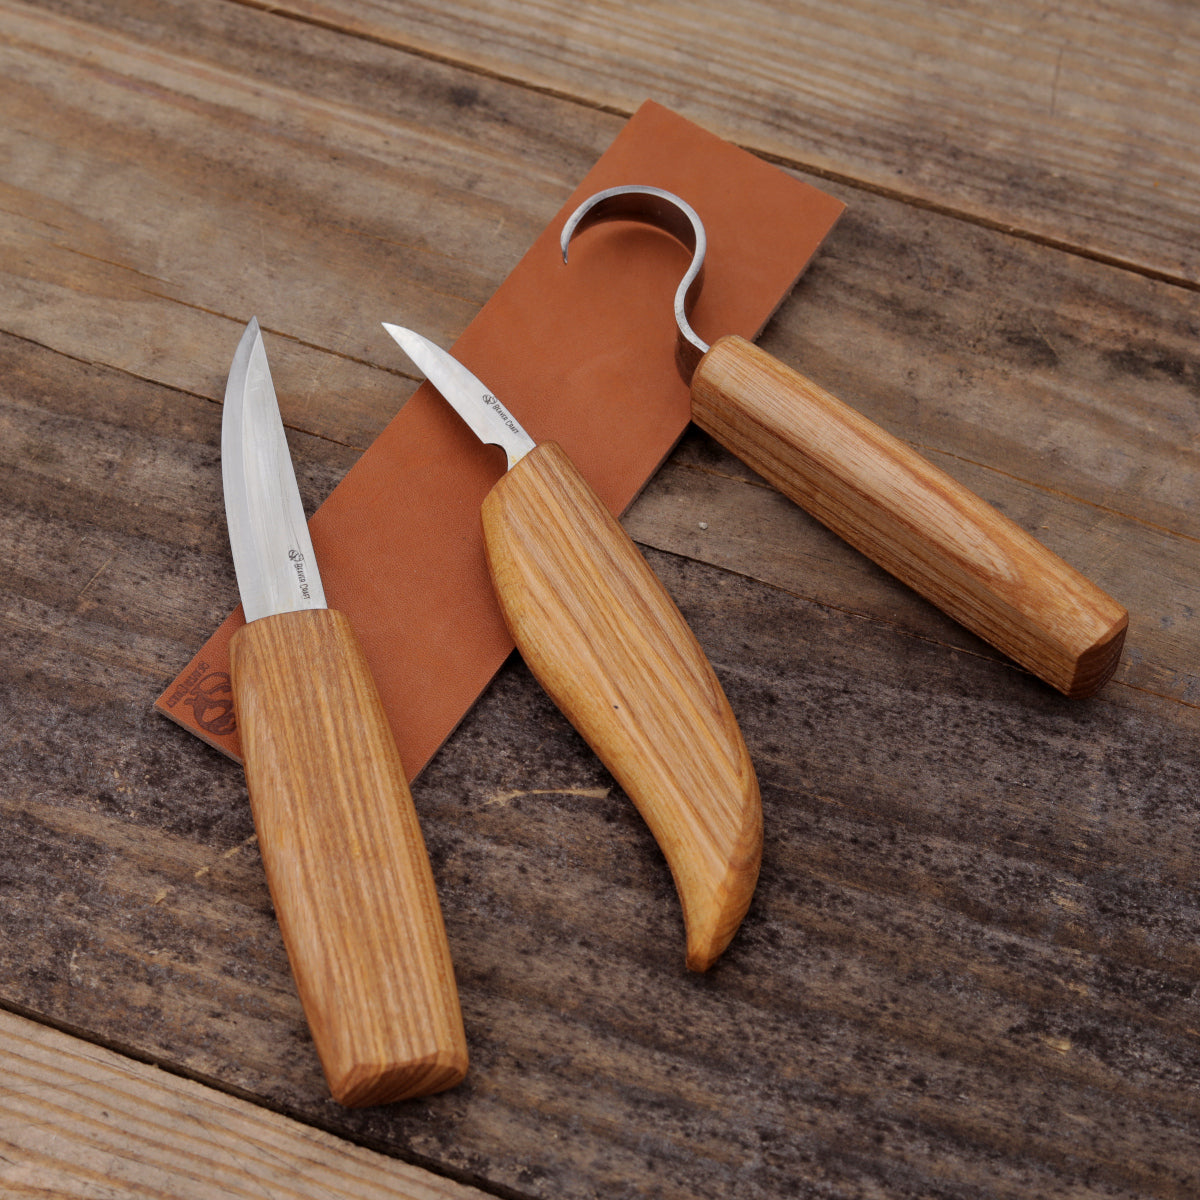 Wood Carving Knife Set, Wood Carving Cutter, Wood Carving Spoon